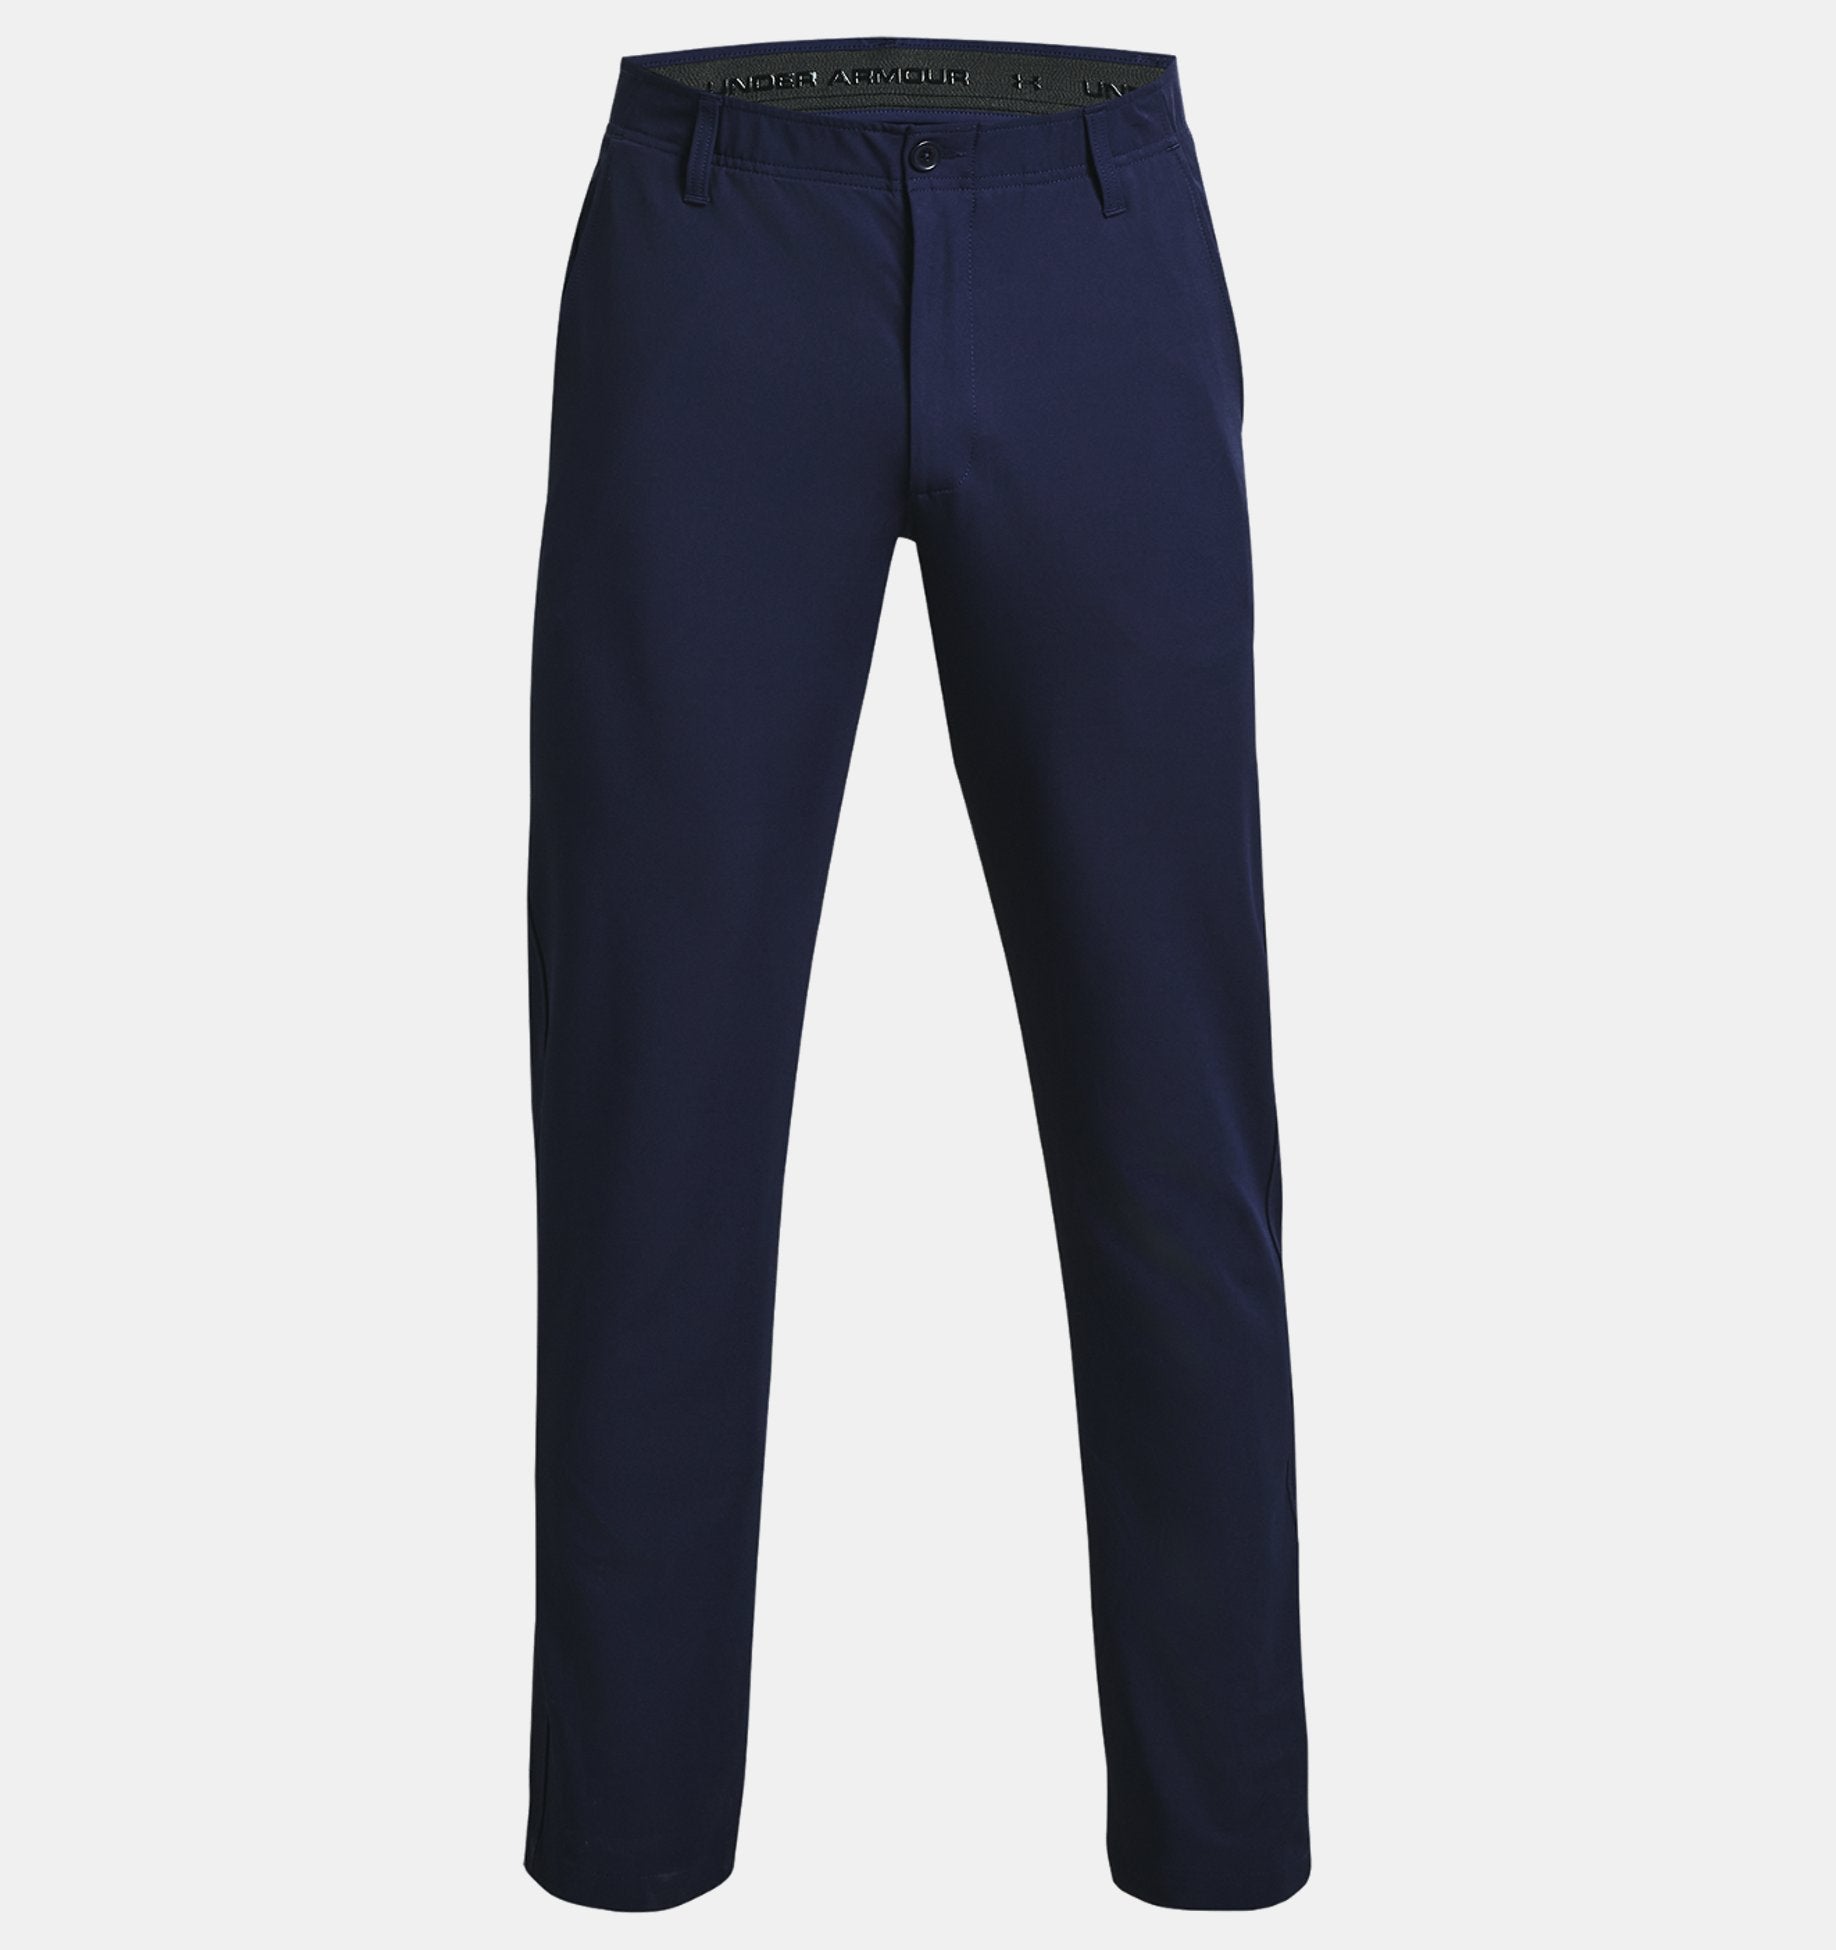 UNDER ARMOUR DRIVE TAPERED Golfbukser